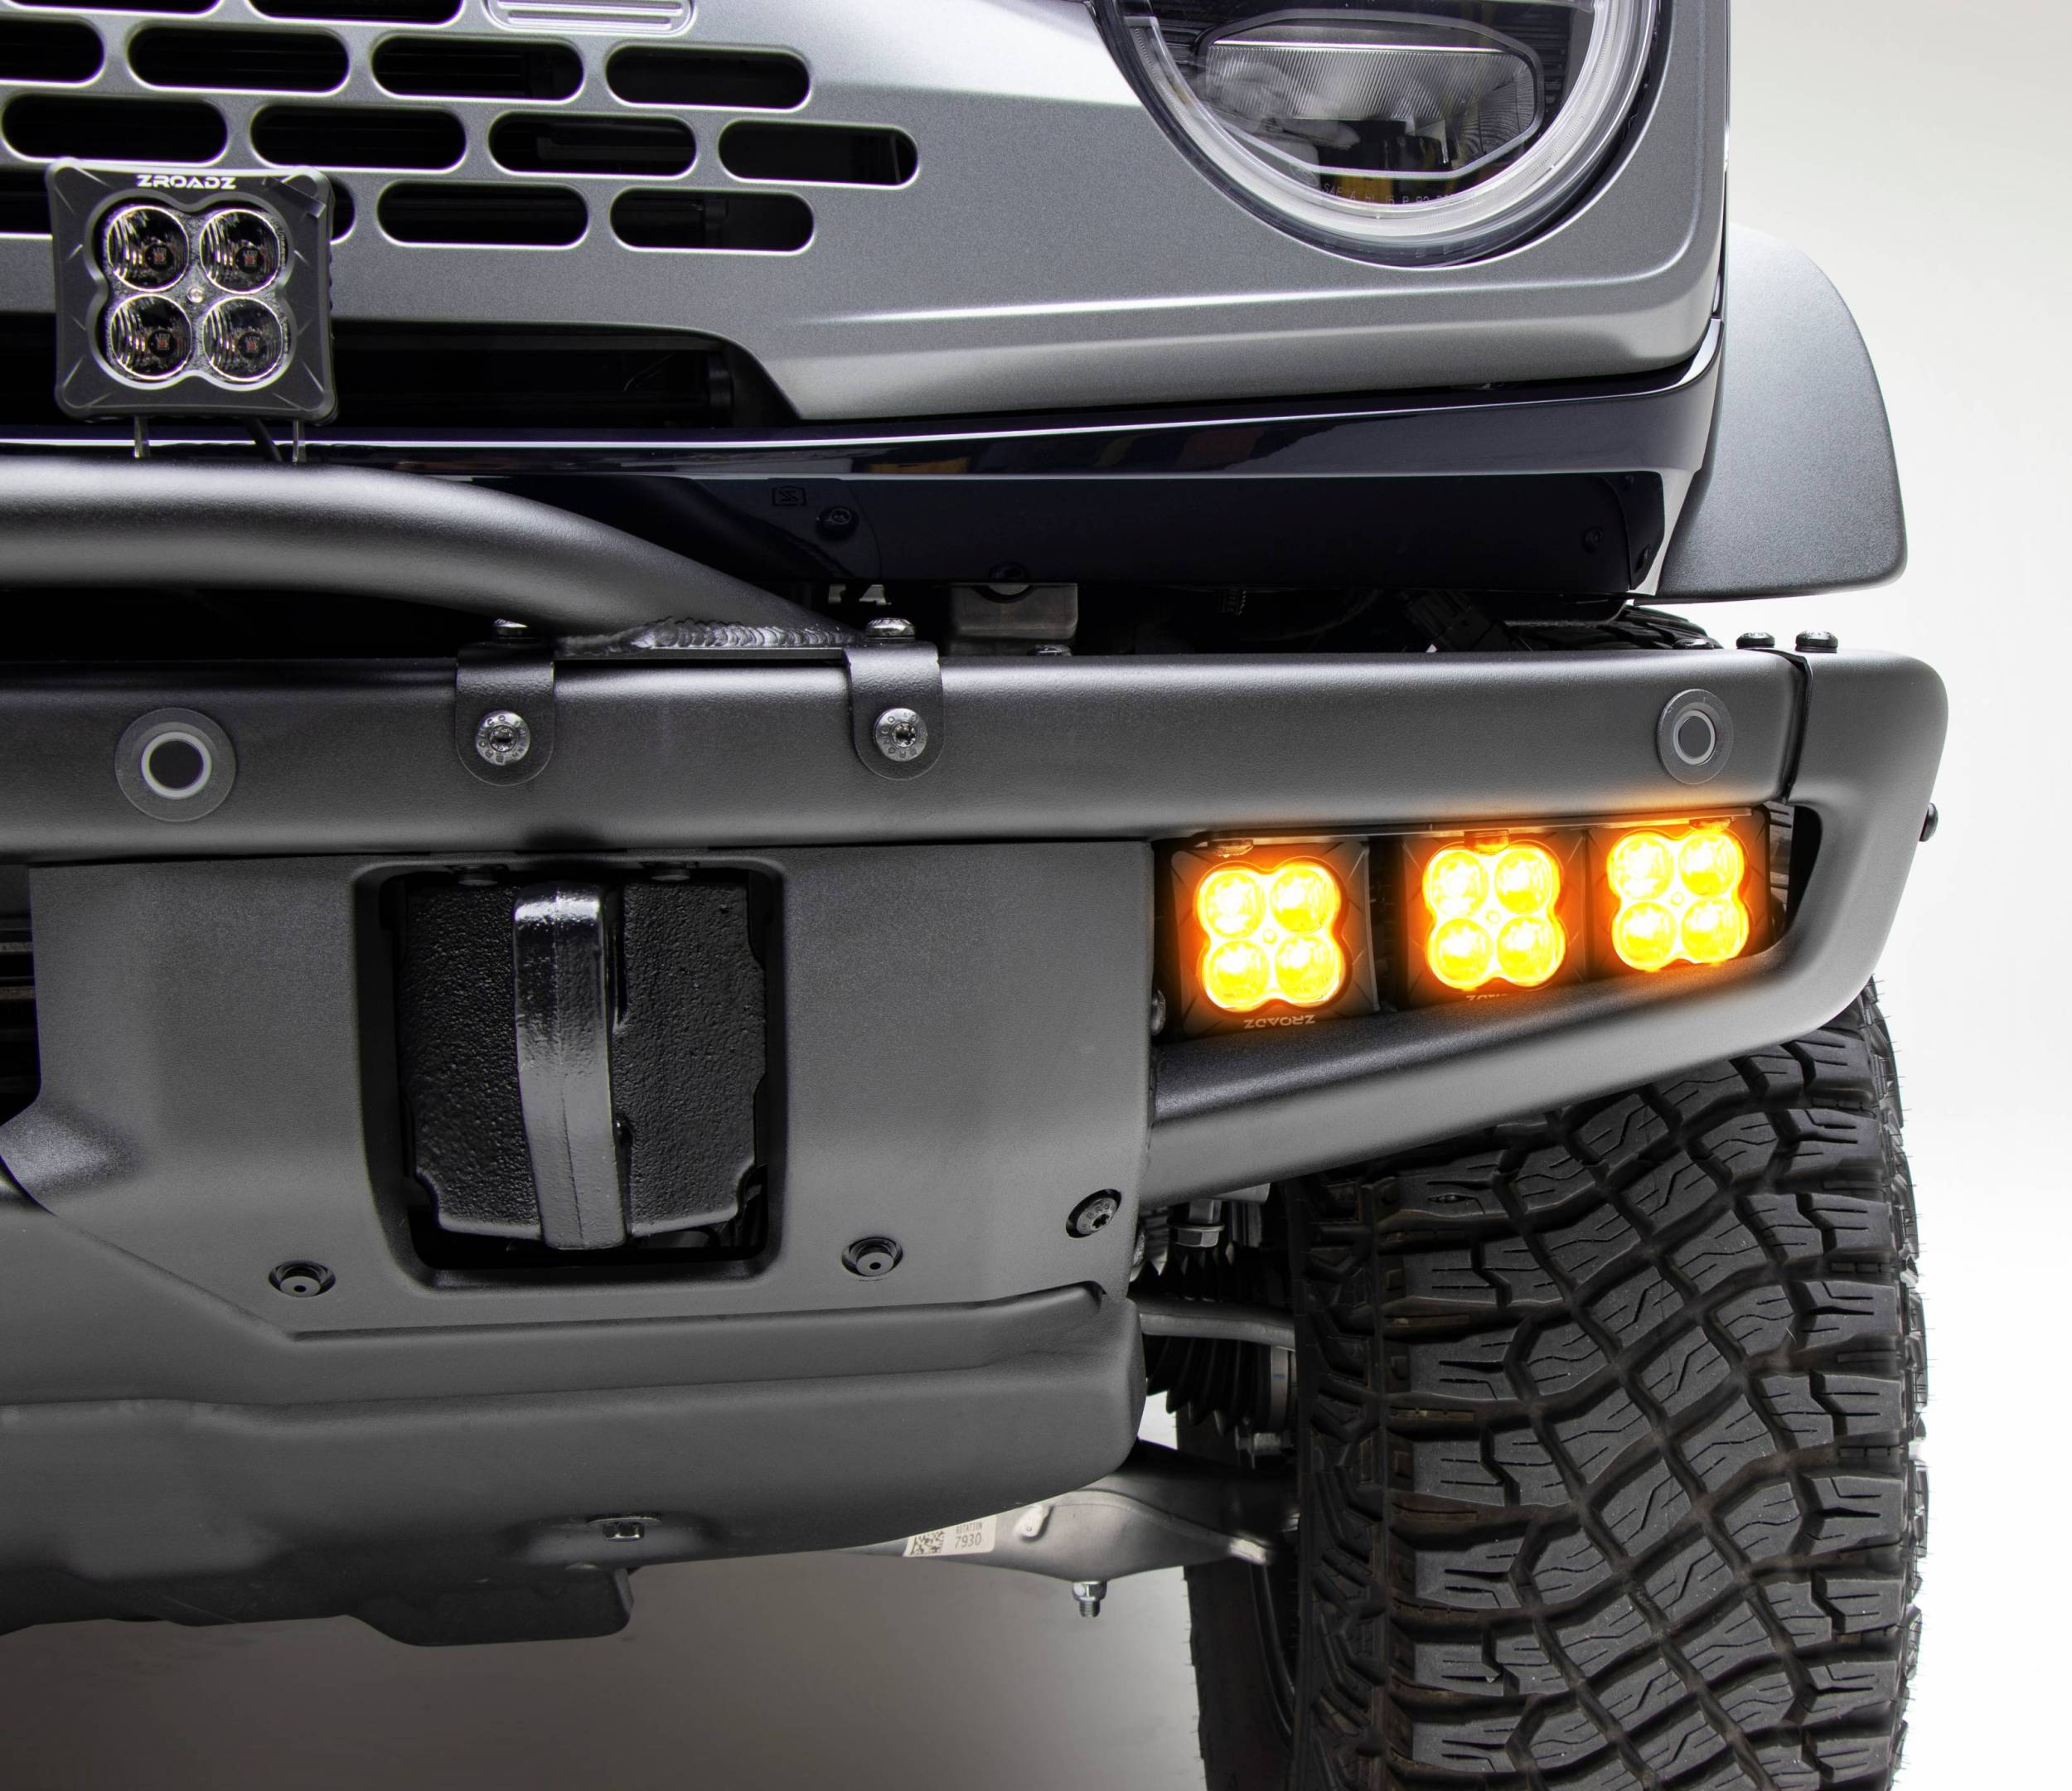 ZROADZ OFF ROAD PRODUCTS - 2021-2022 Ford Bronco Front Bumper Fog LED KIT, Includes (6) 3 inch ZROADZ Amber LED Pod Lights - Part # Z325401-KITA